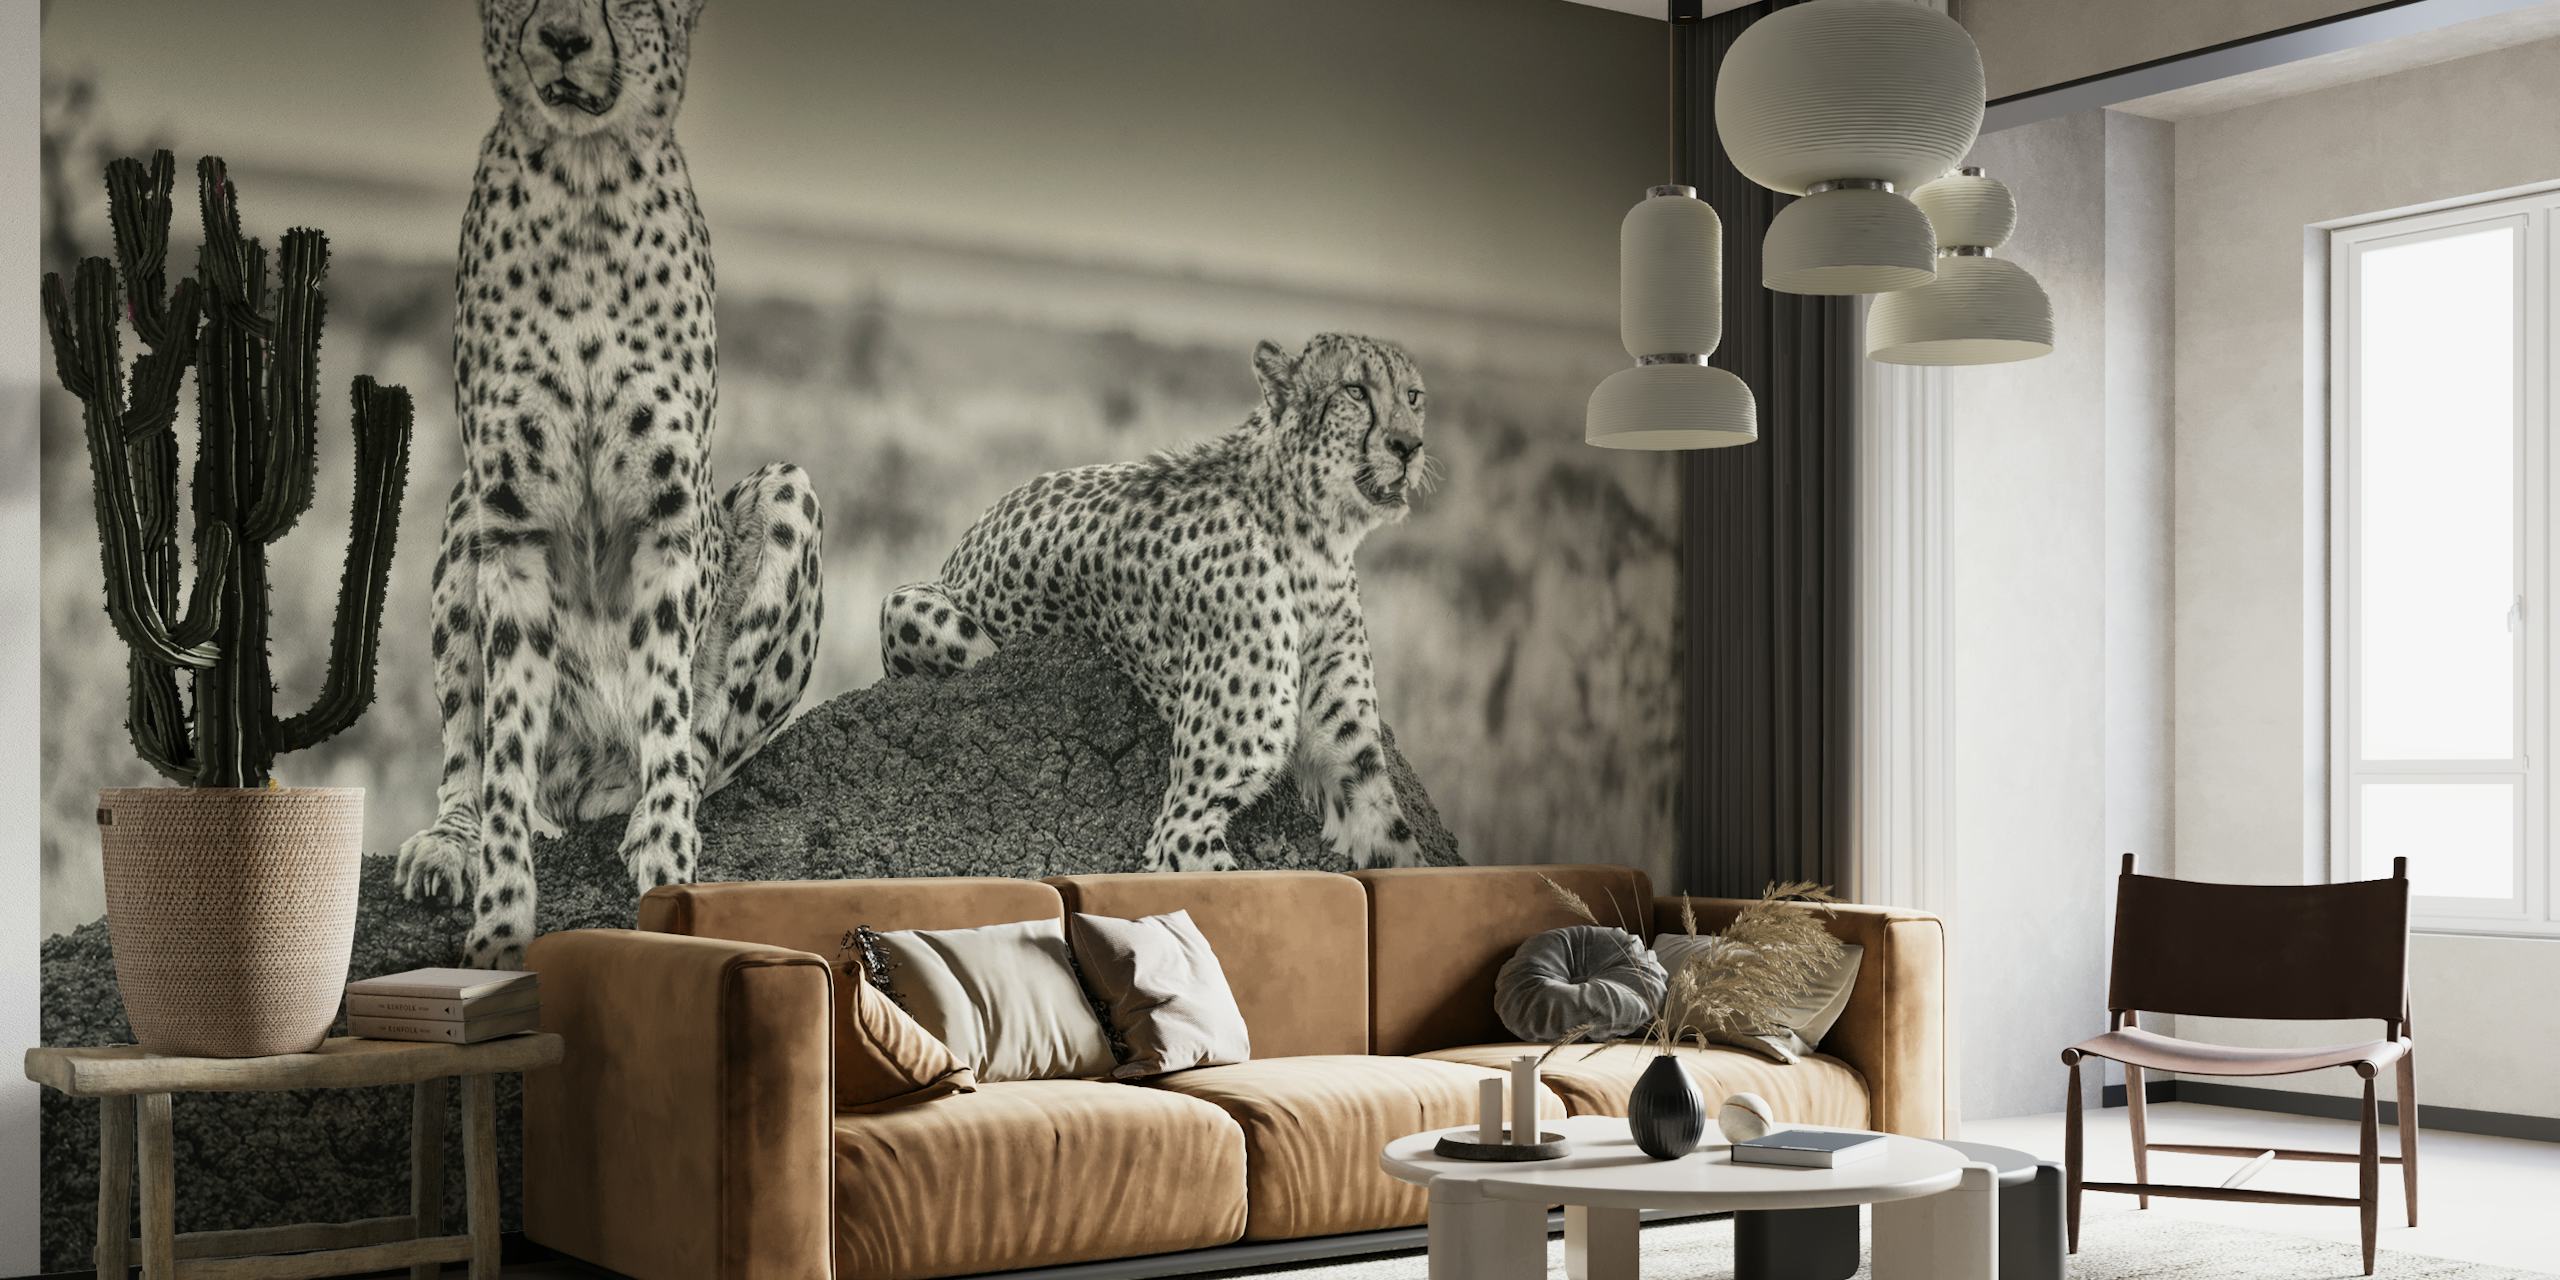 Two Cheetahs watching out wallpaper